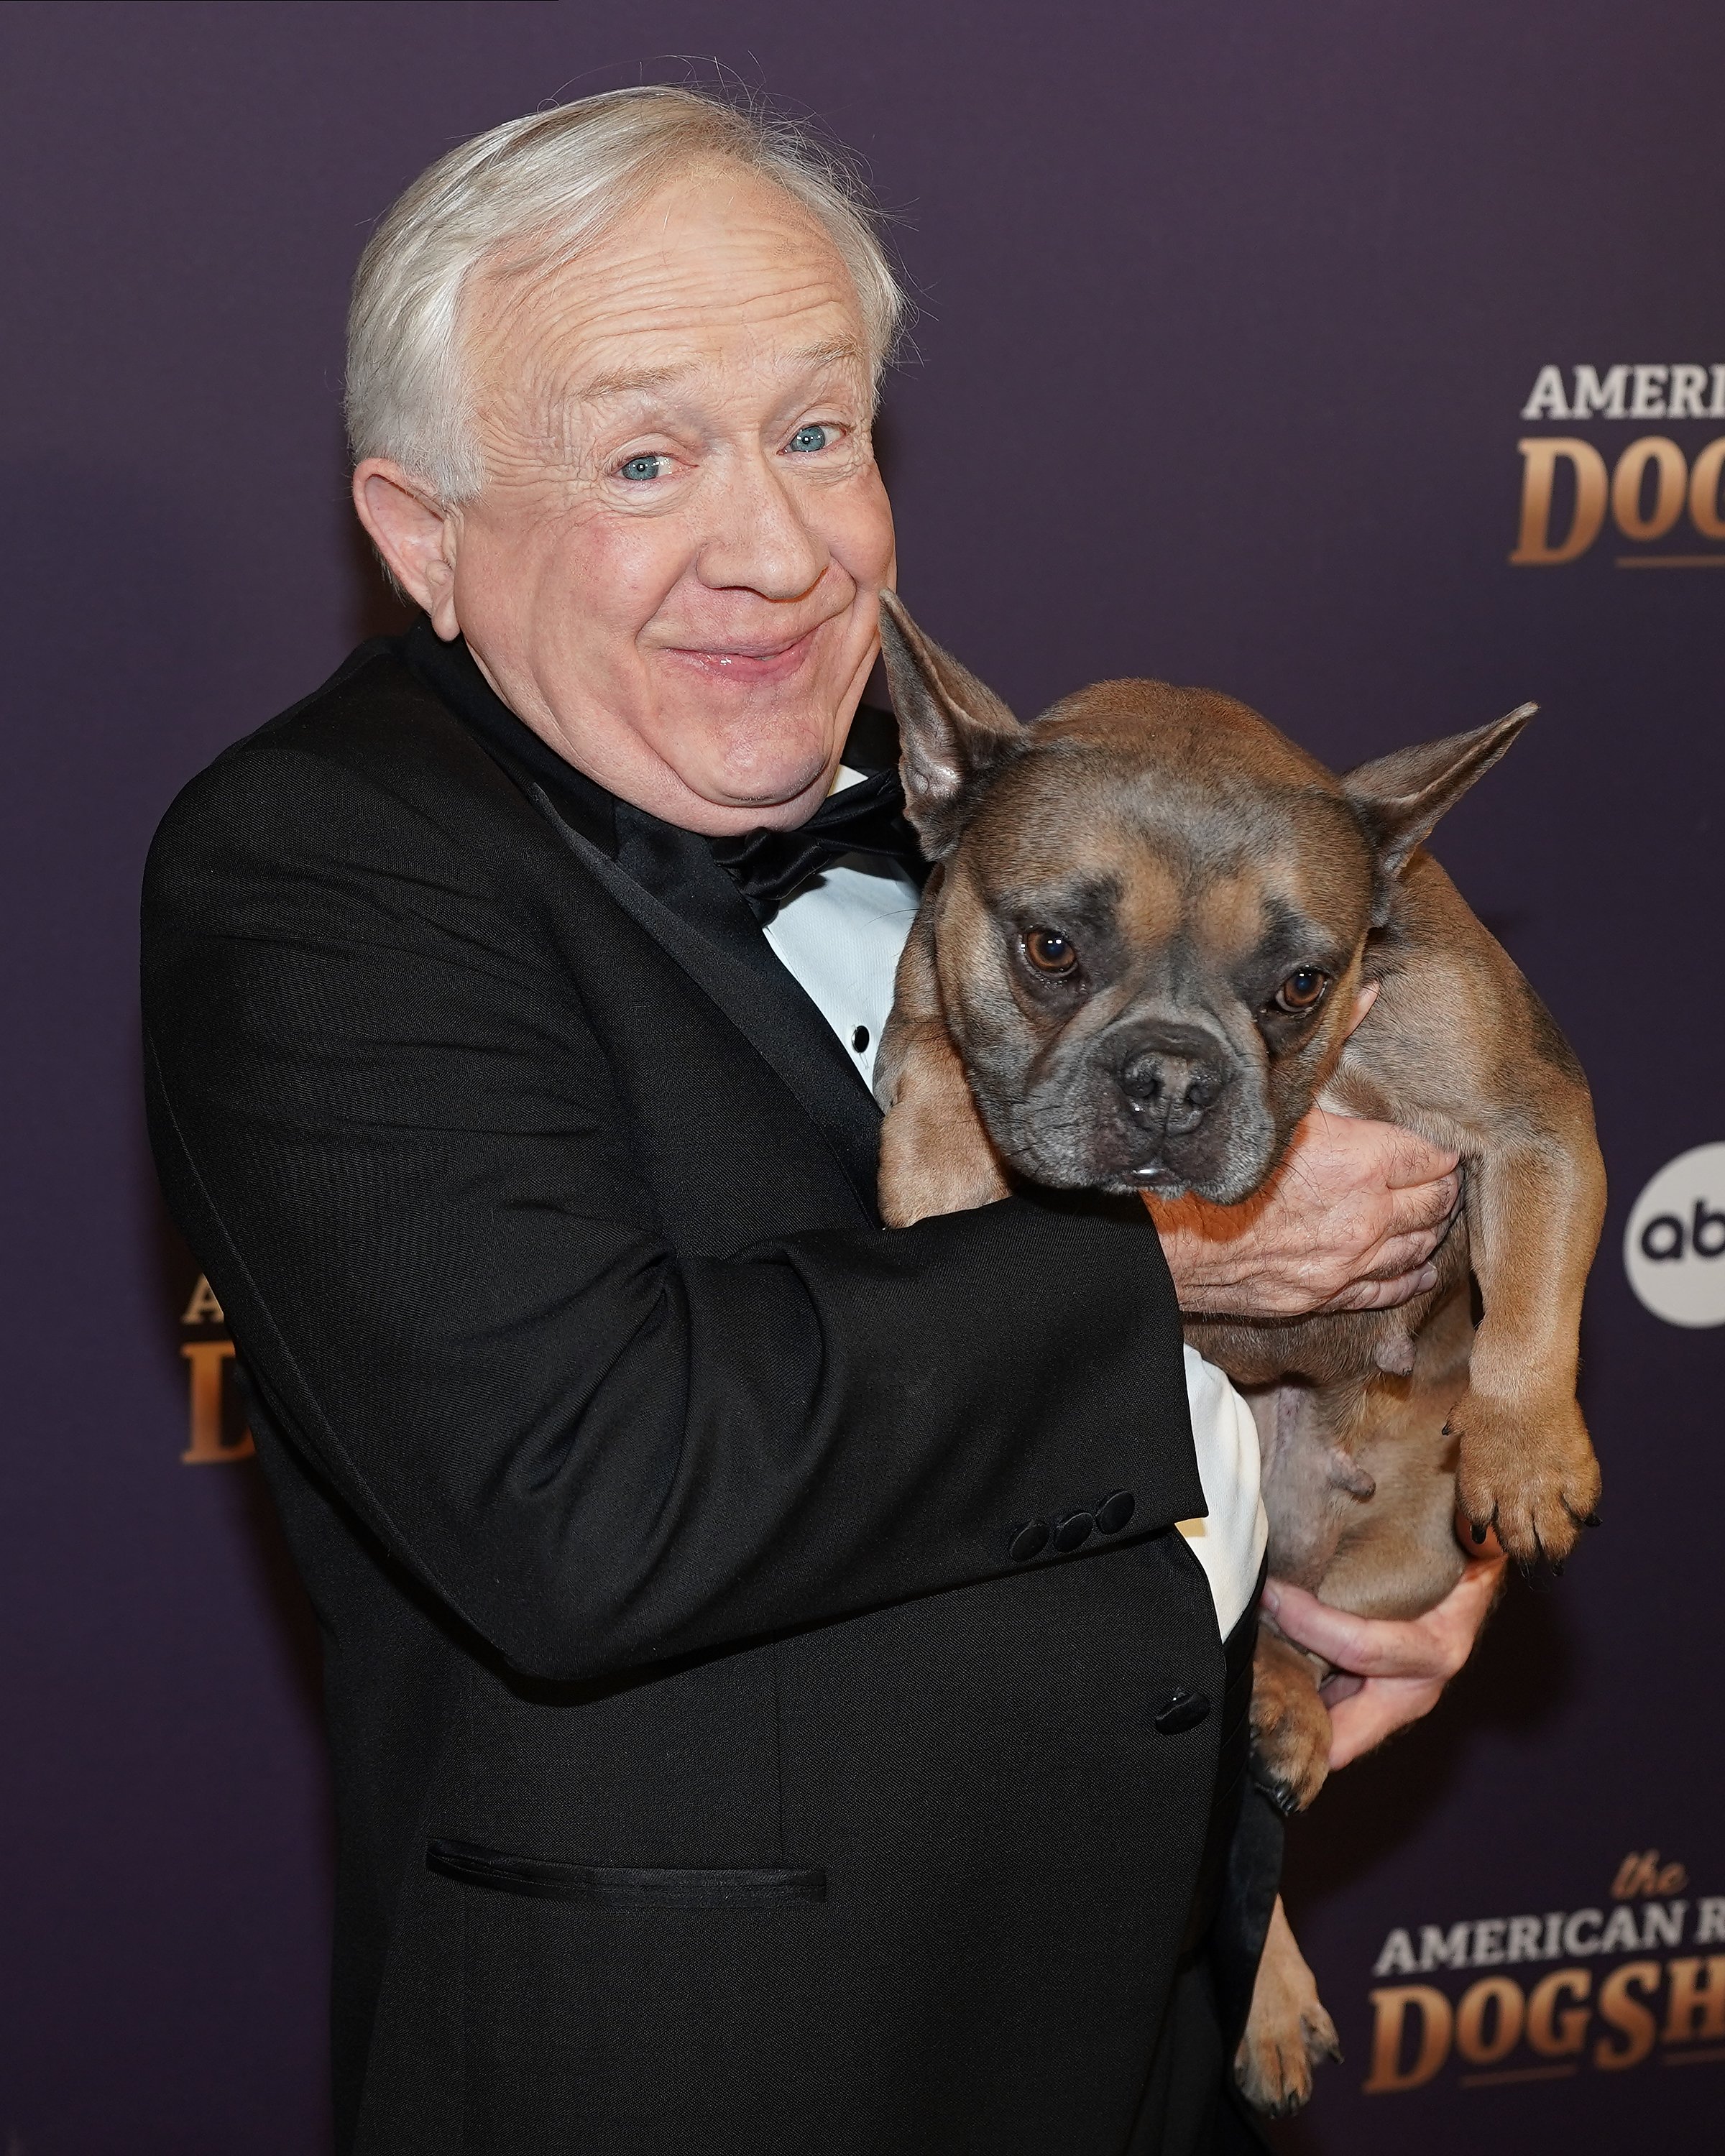 Leslie Jordan at ABC's "The American Rescue Dog Show" on April 10, 2022 | Source: Getty Images 